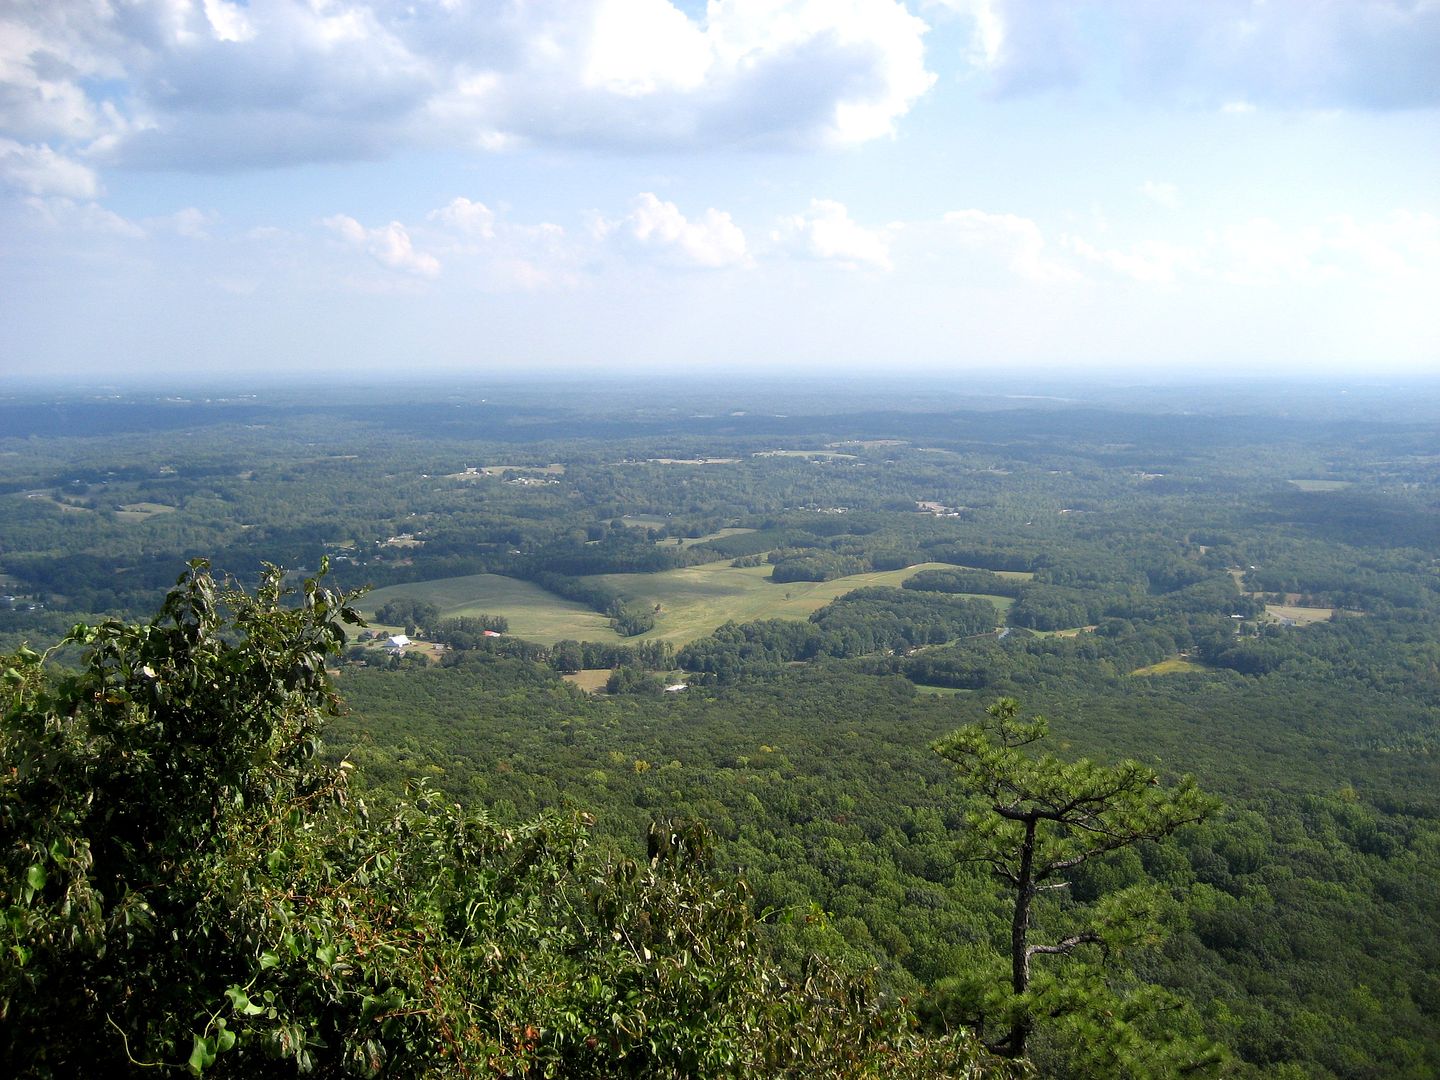 Pilot Mountain is not far from Mt. Airy and is incredibly beautiful. On the show, it was called, Mount Pilot.